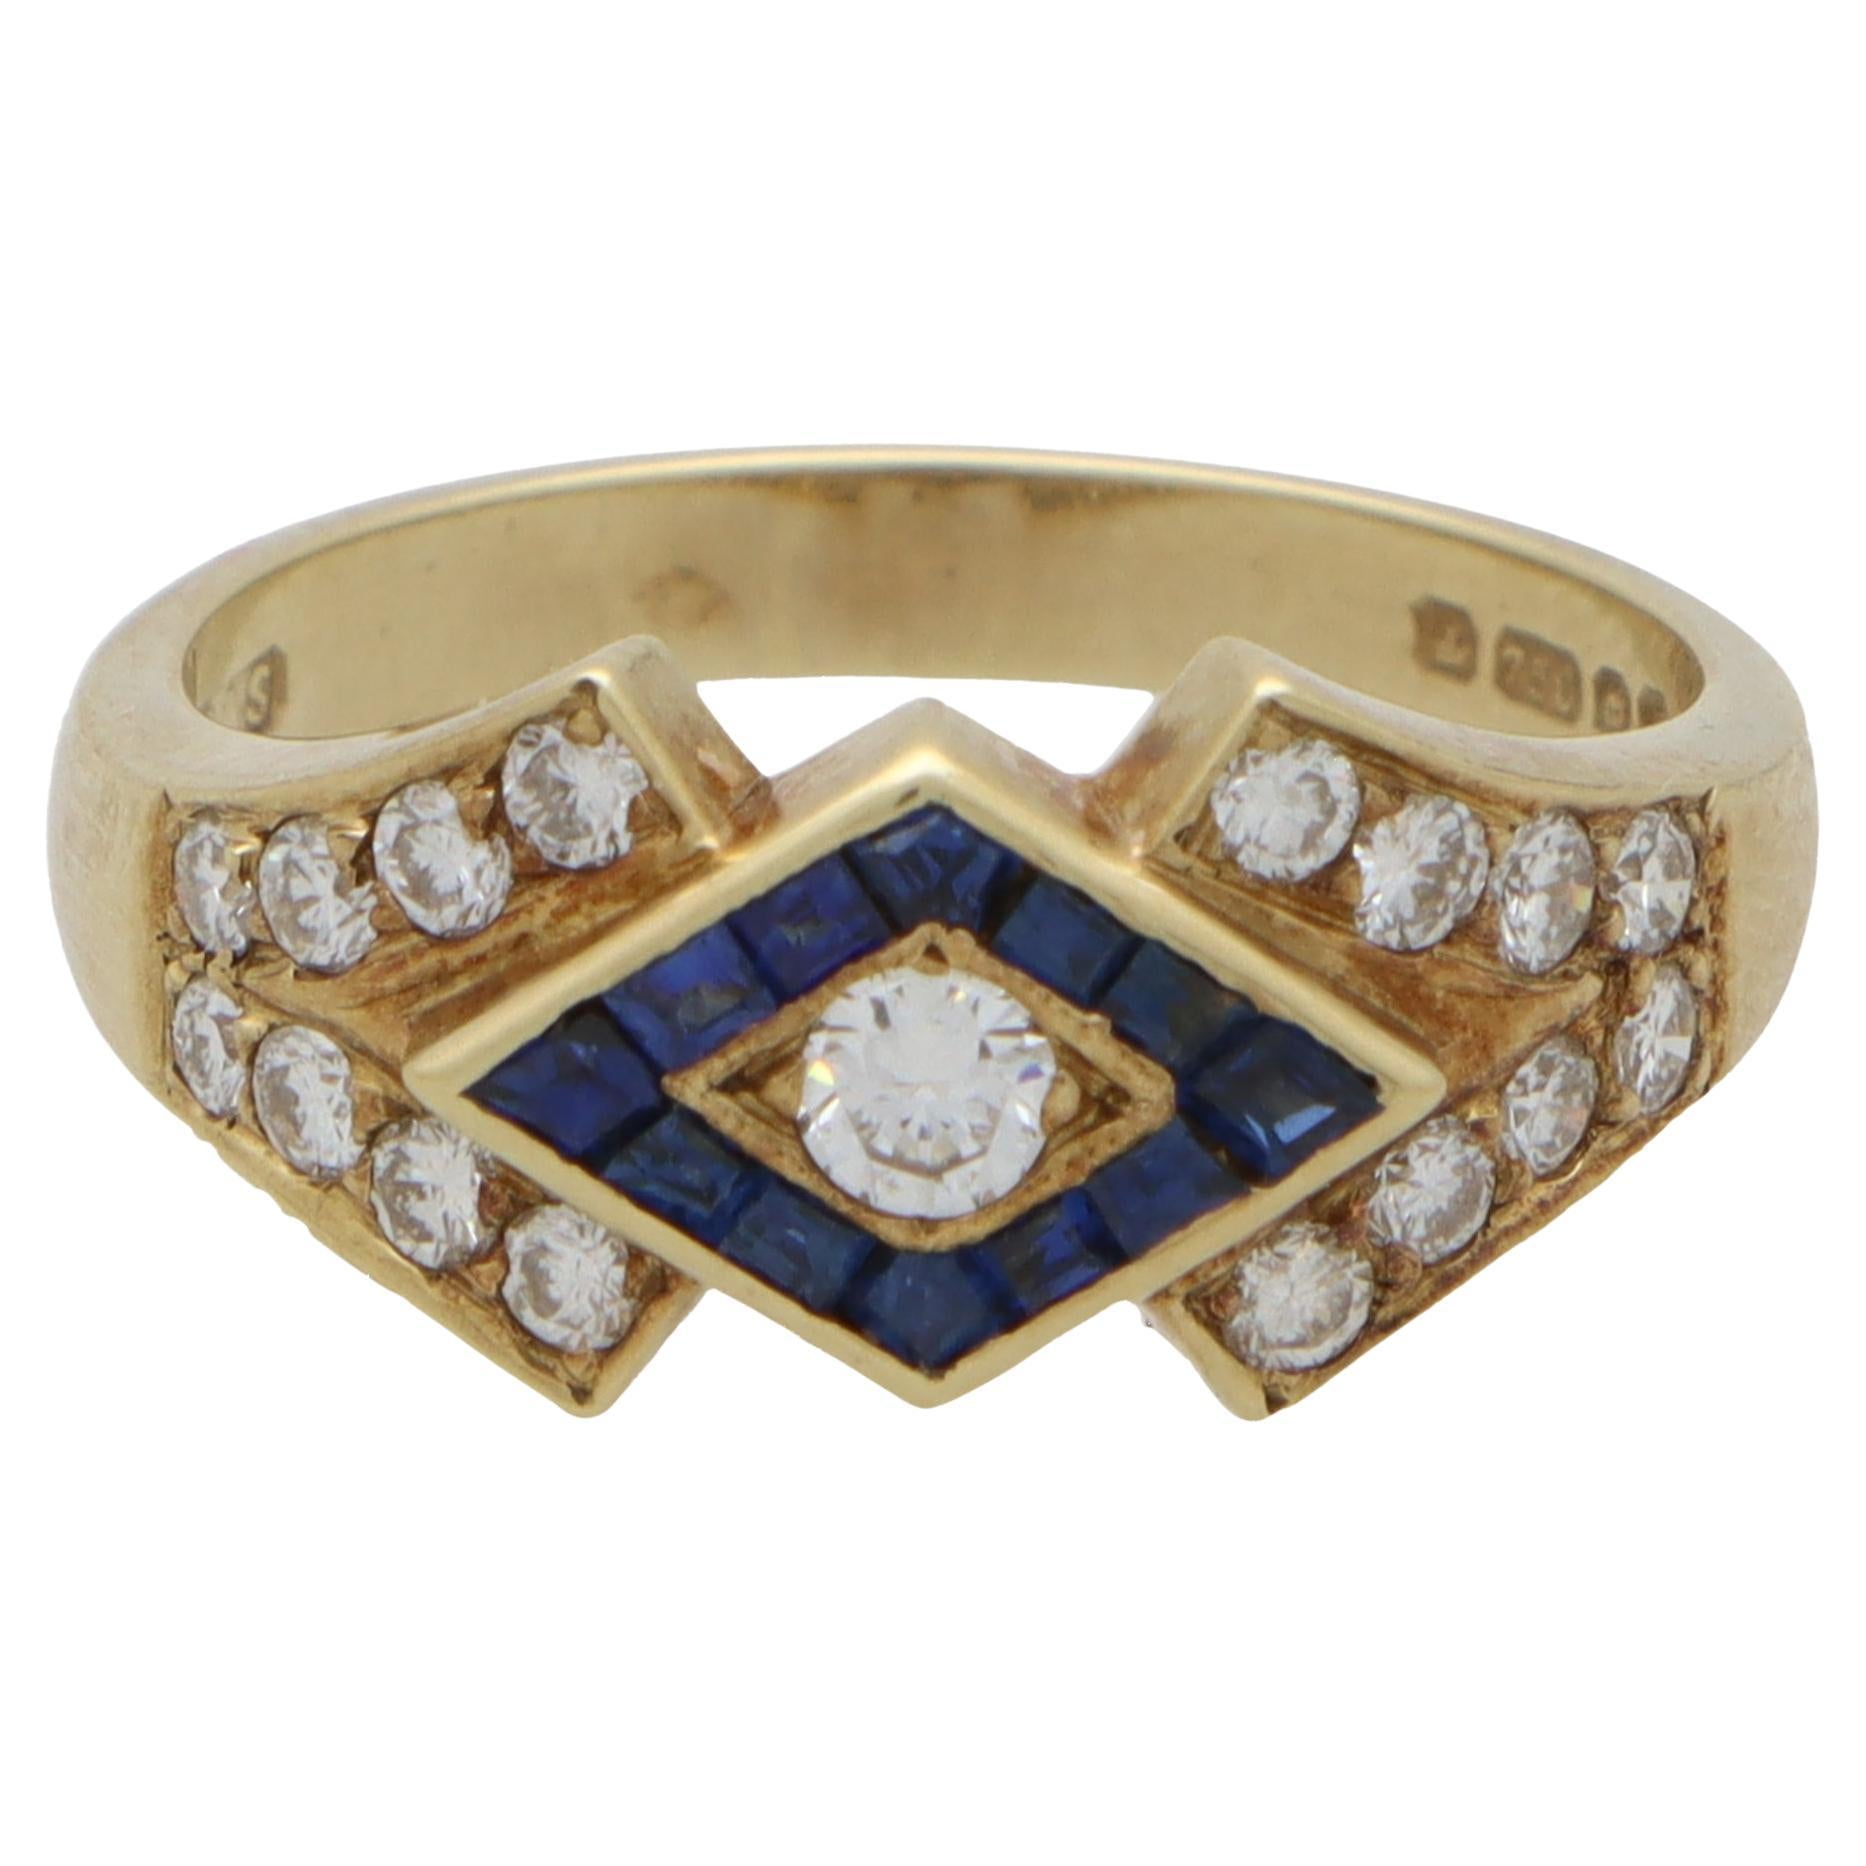 Contemporary Sapphire and Diamond Dress Ring Set in 18k Yellow Gold